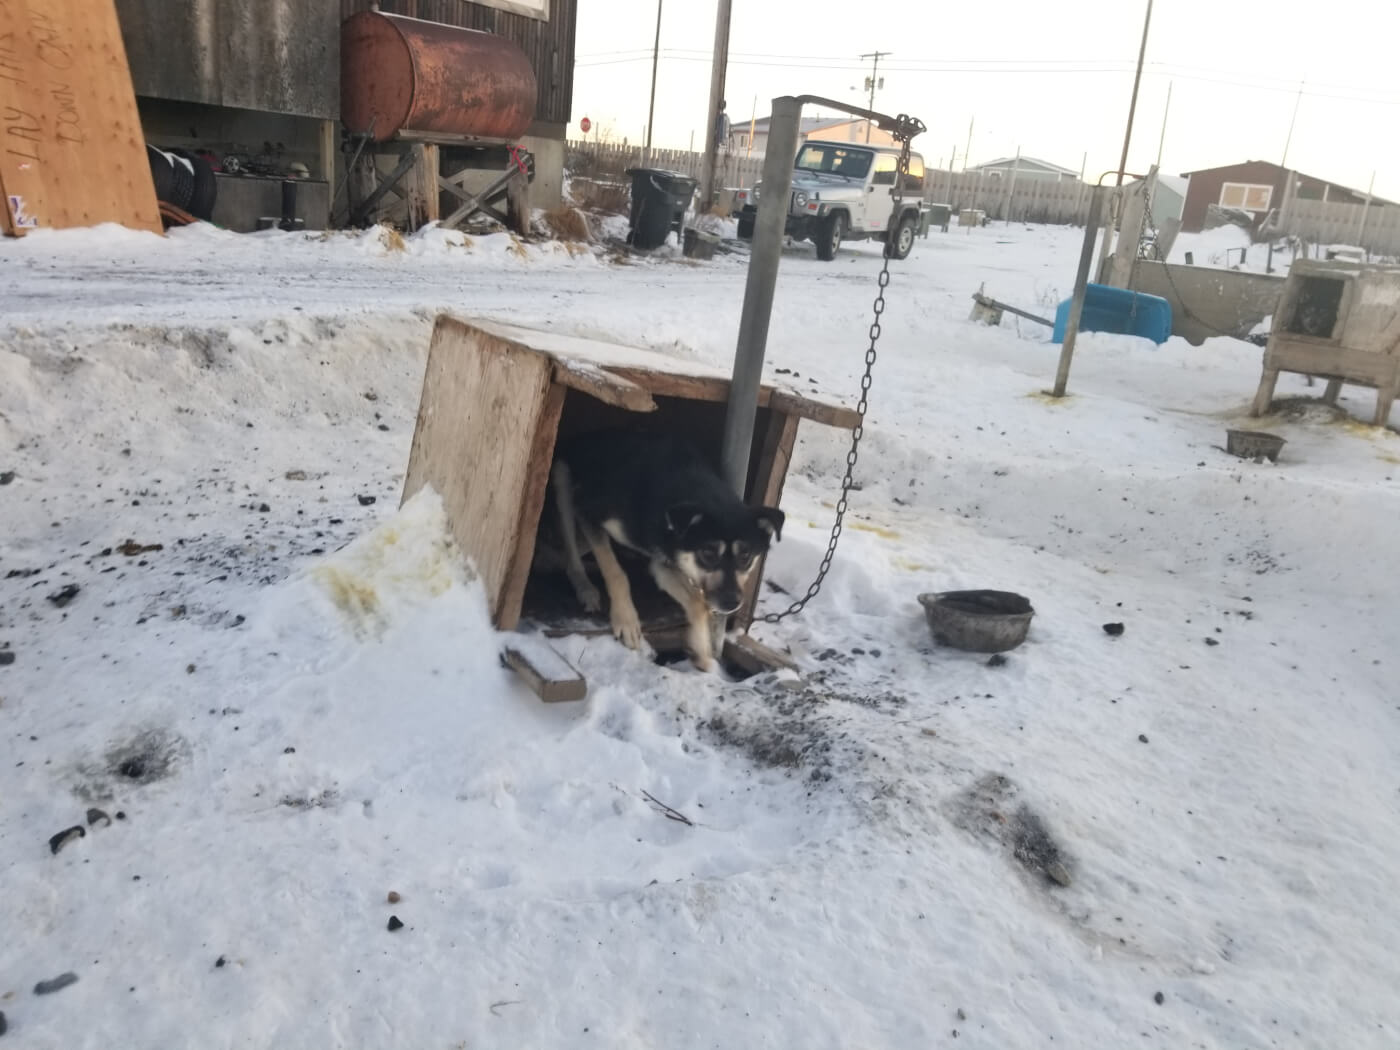 Dog Porn Snow - Video: Dogs Endure Pain, Isolation, and Neglect at Iditarod Kennels